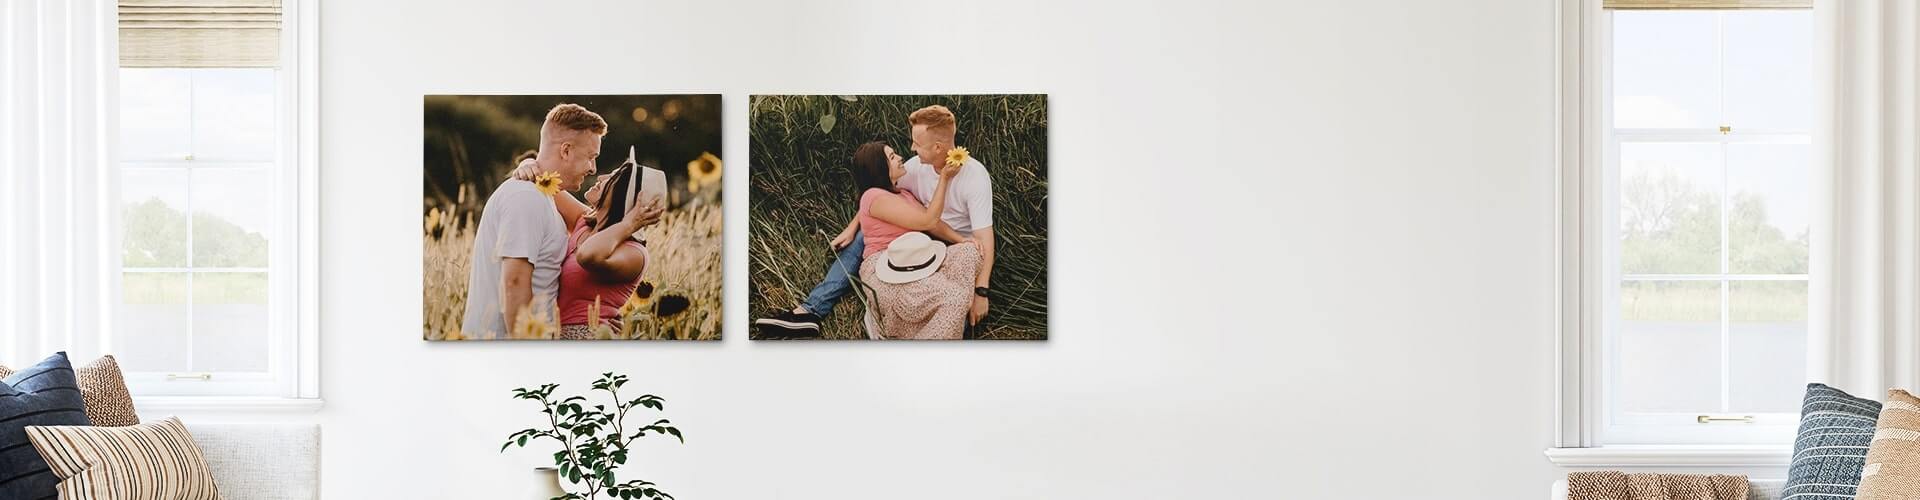 Modern gallery wrapped wall decor! Family photos print on Canvas 